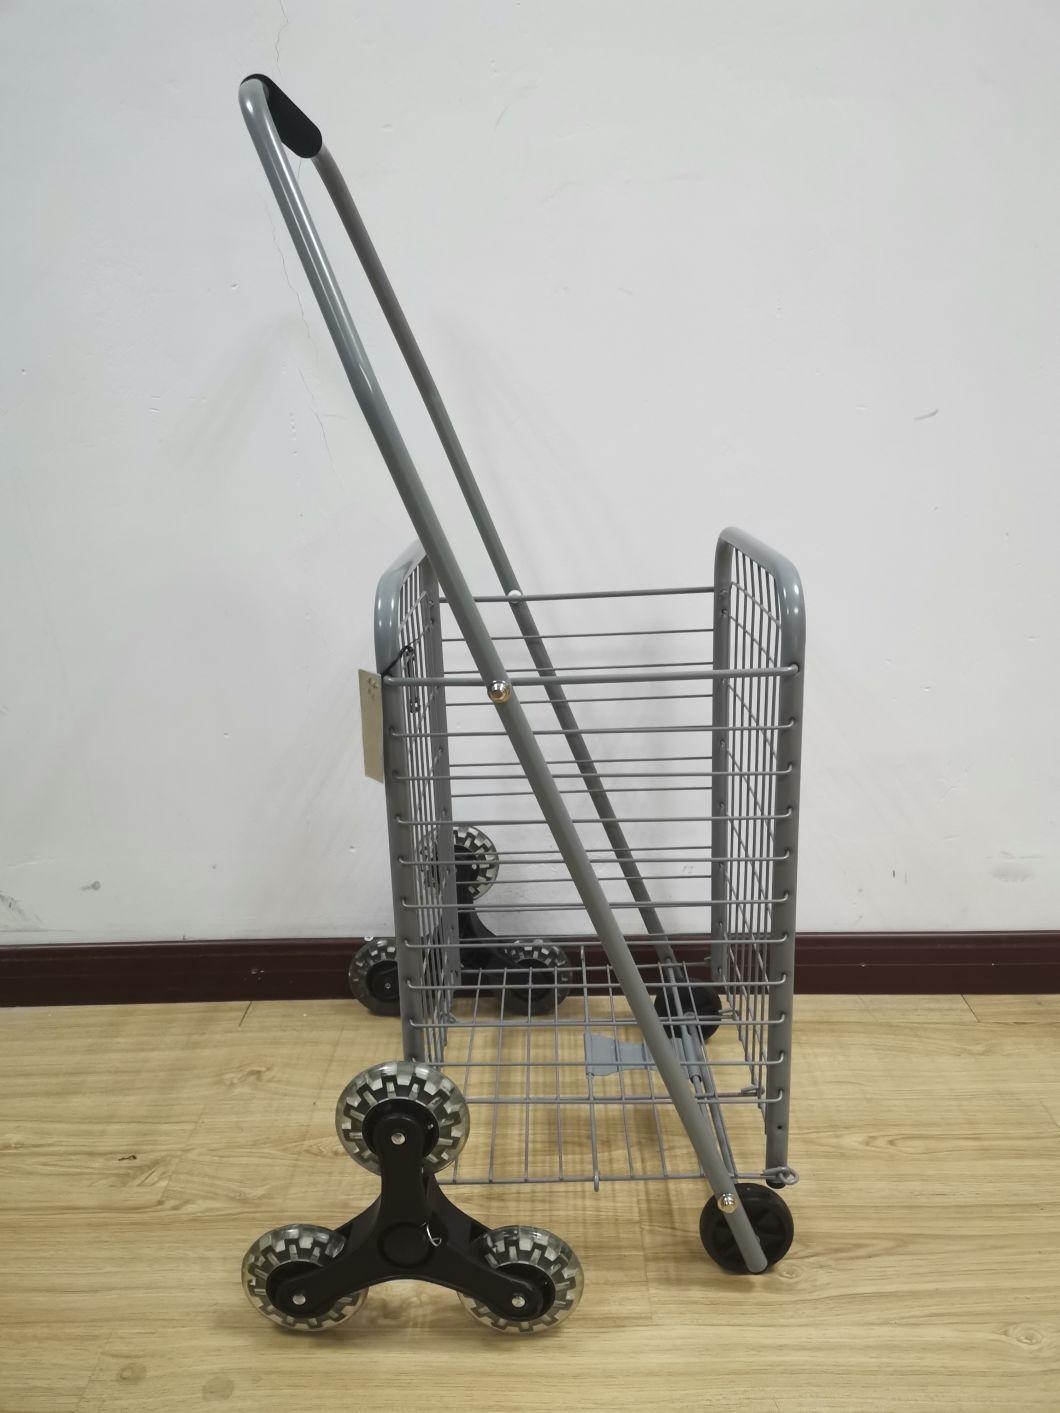 China Supplier Metal Foldable Rolling Shopping Trolley Carts for Carrying Groceries